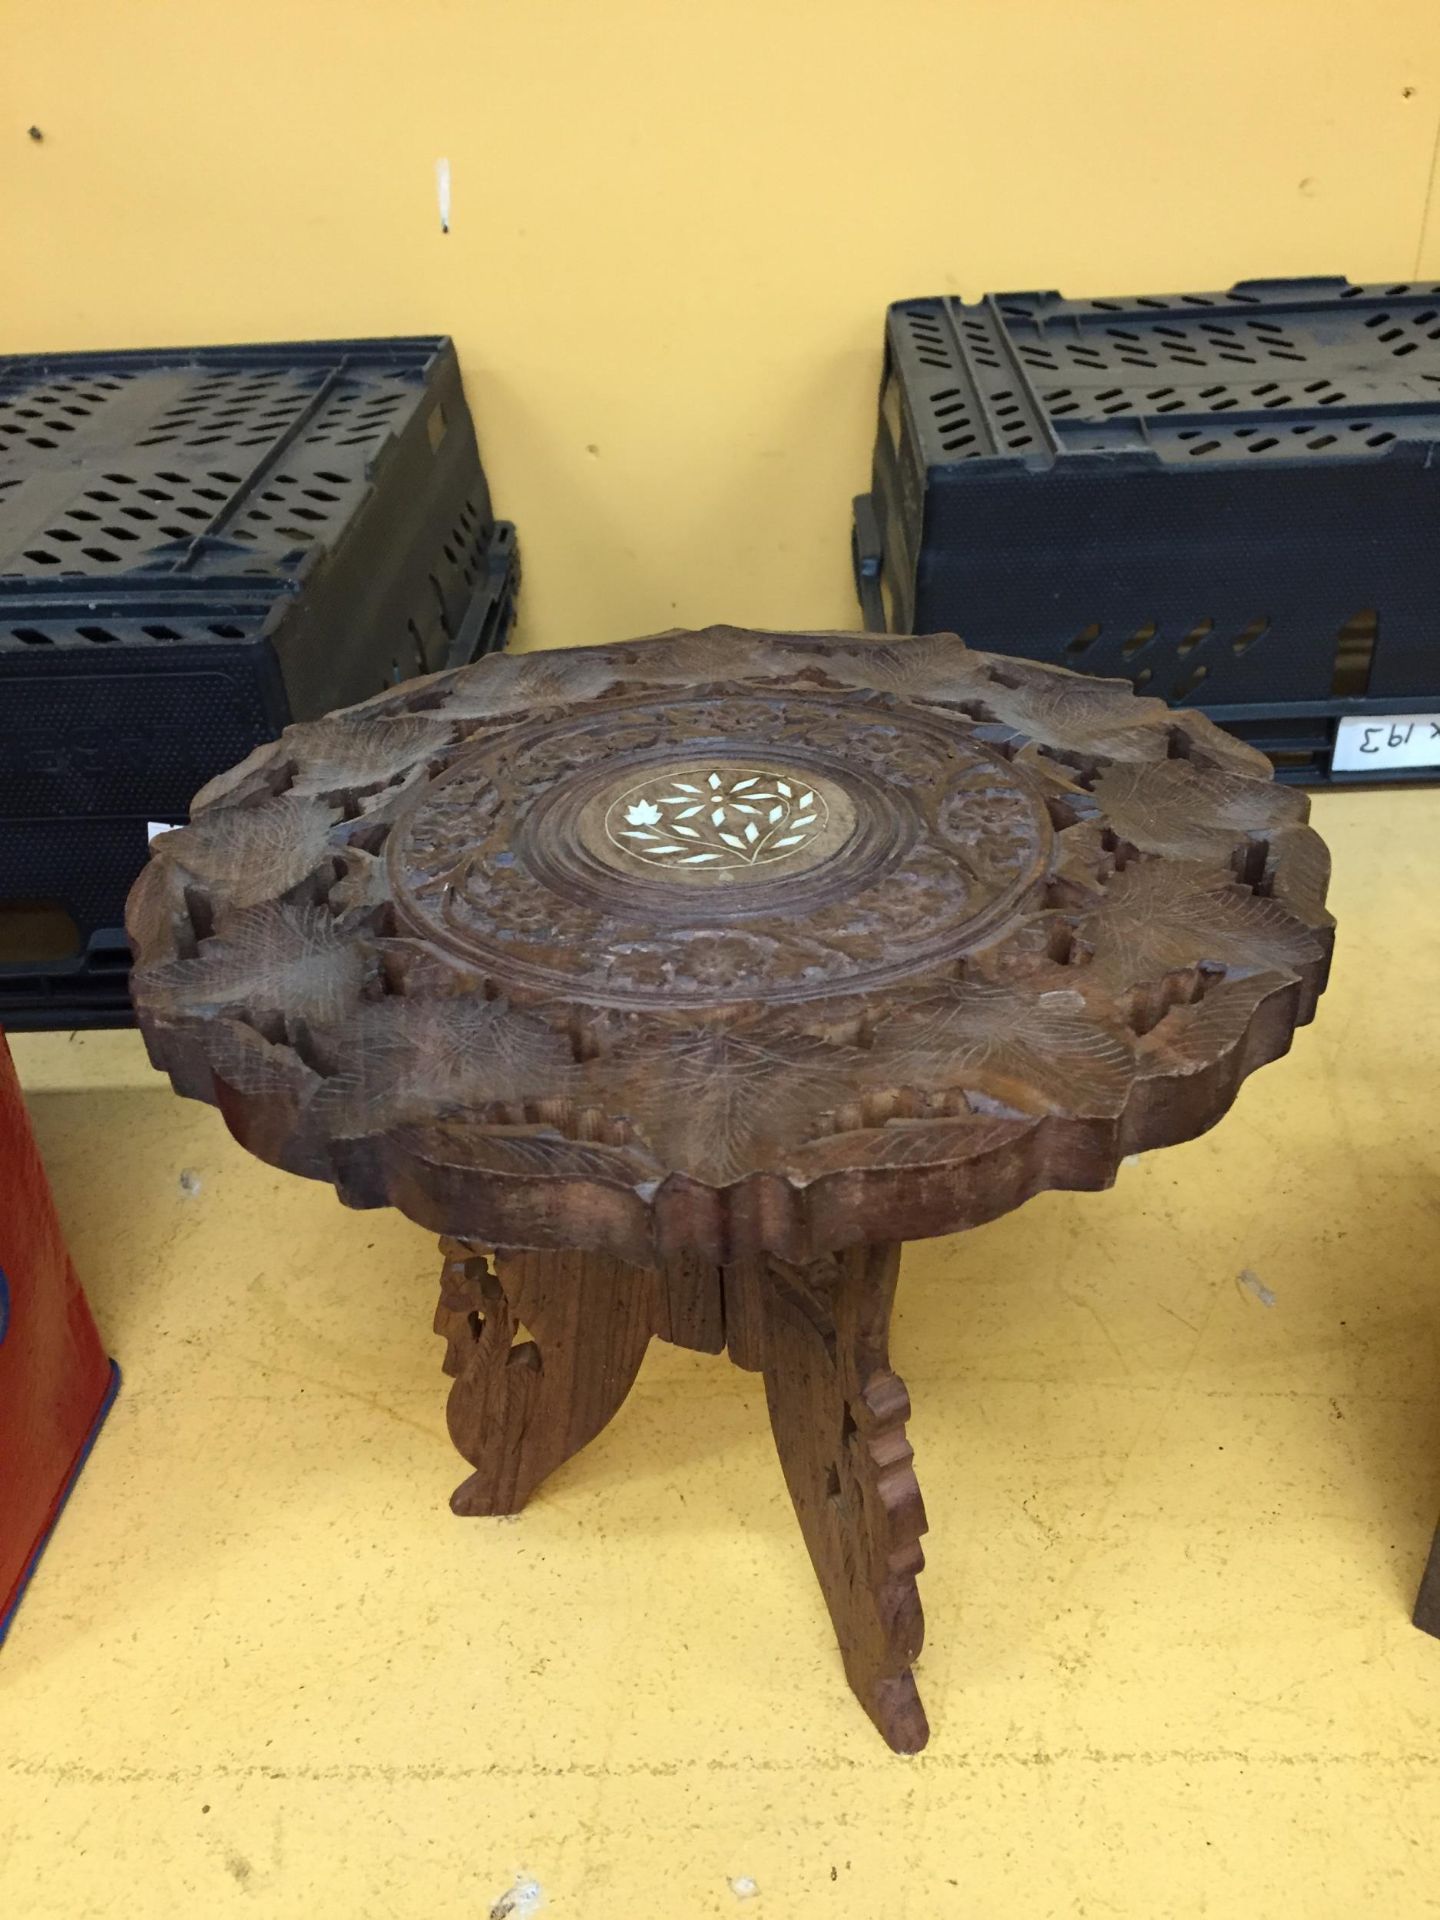 A VINTAGE CARVED WOODEN MIDDLE EASTERN TABLE - Image 3 of 3